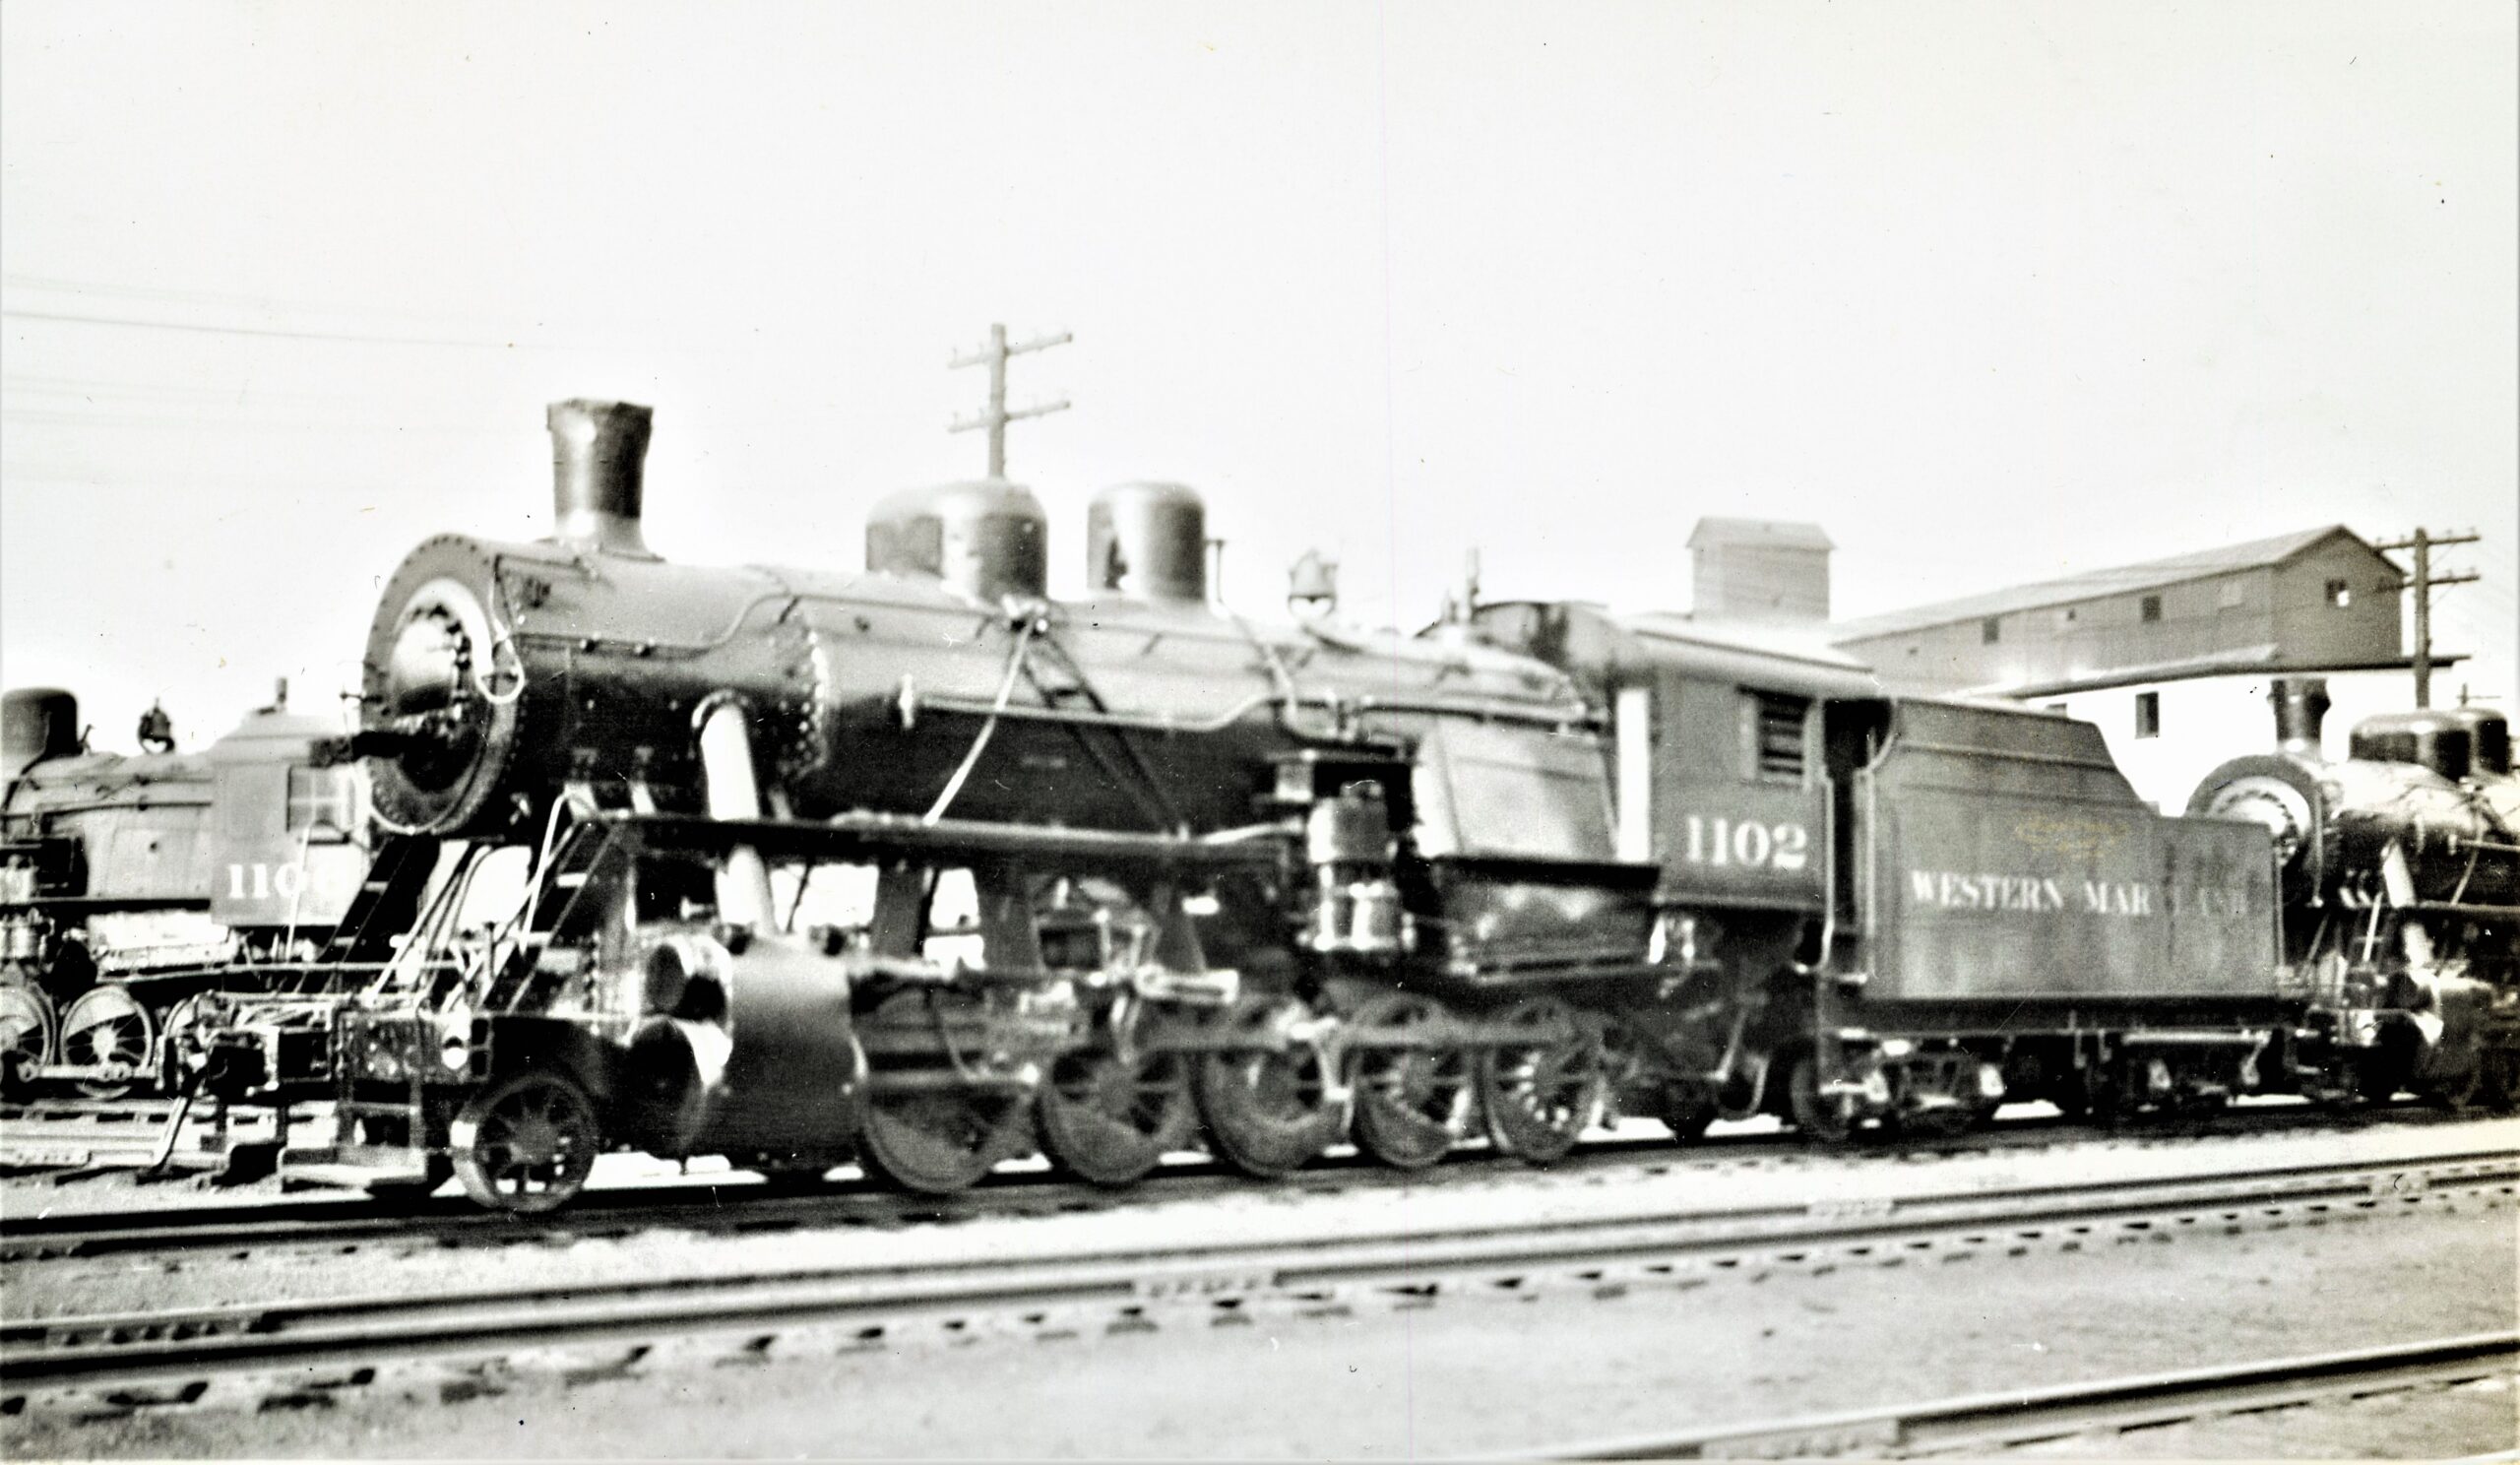 Western Maryland Railway | Cumberland, Maryland | Class I-1 2-10-0 steam locomotive #1102 | October 5, 1938 | West Jersey Chapter NRHS